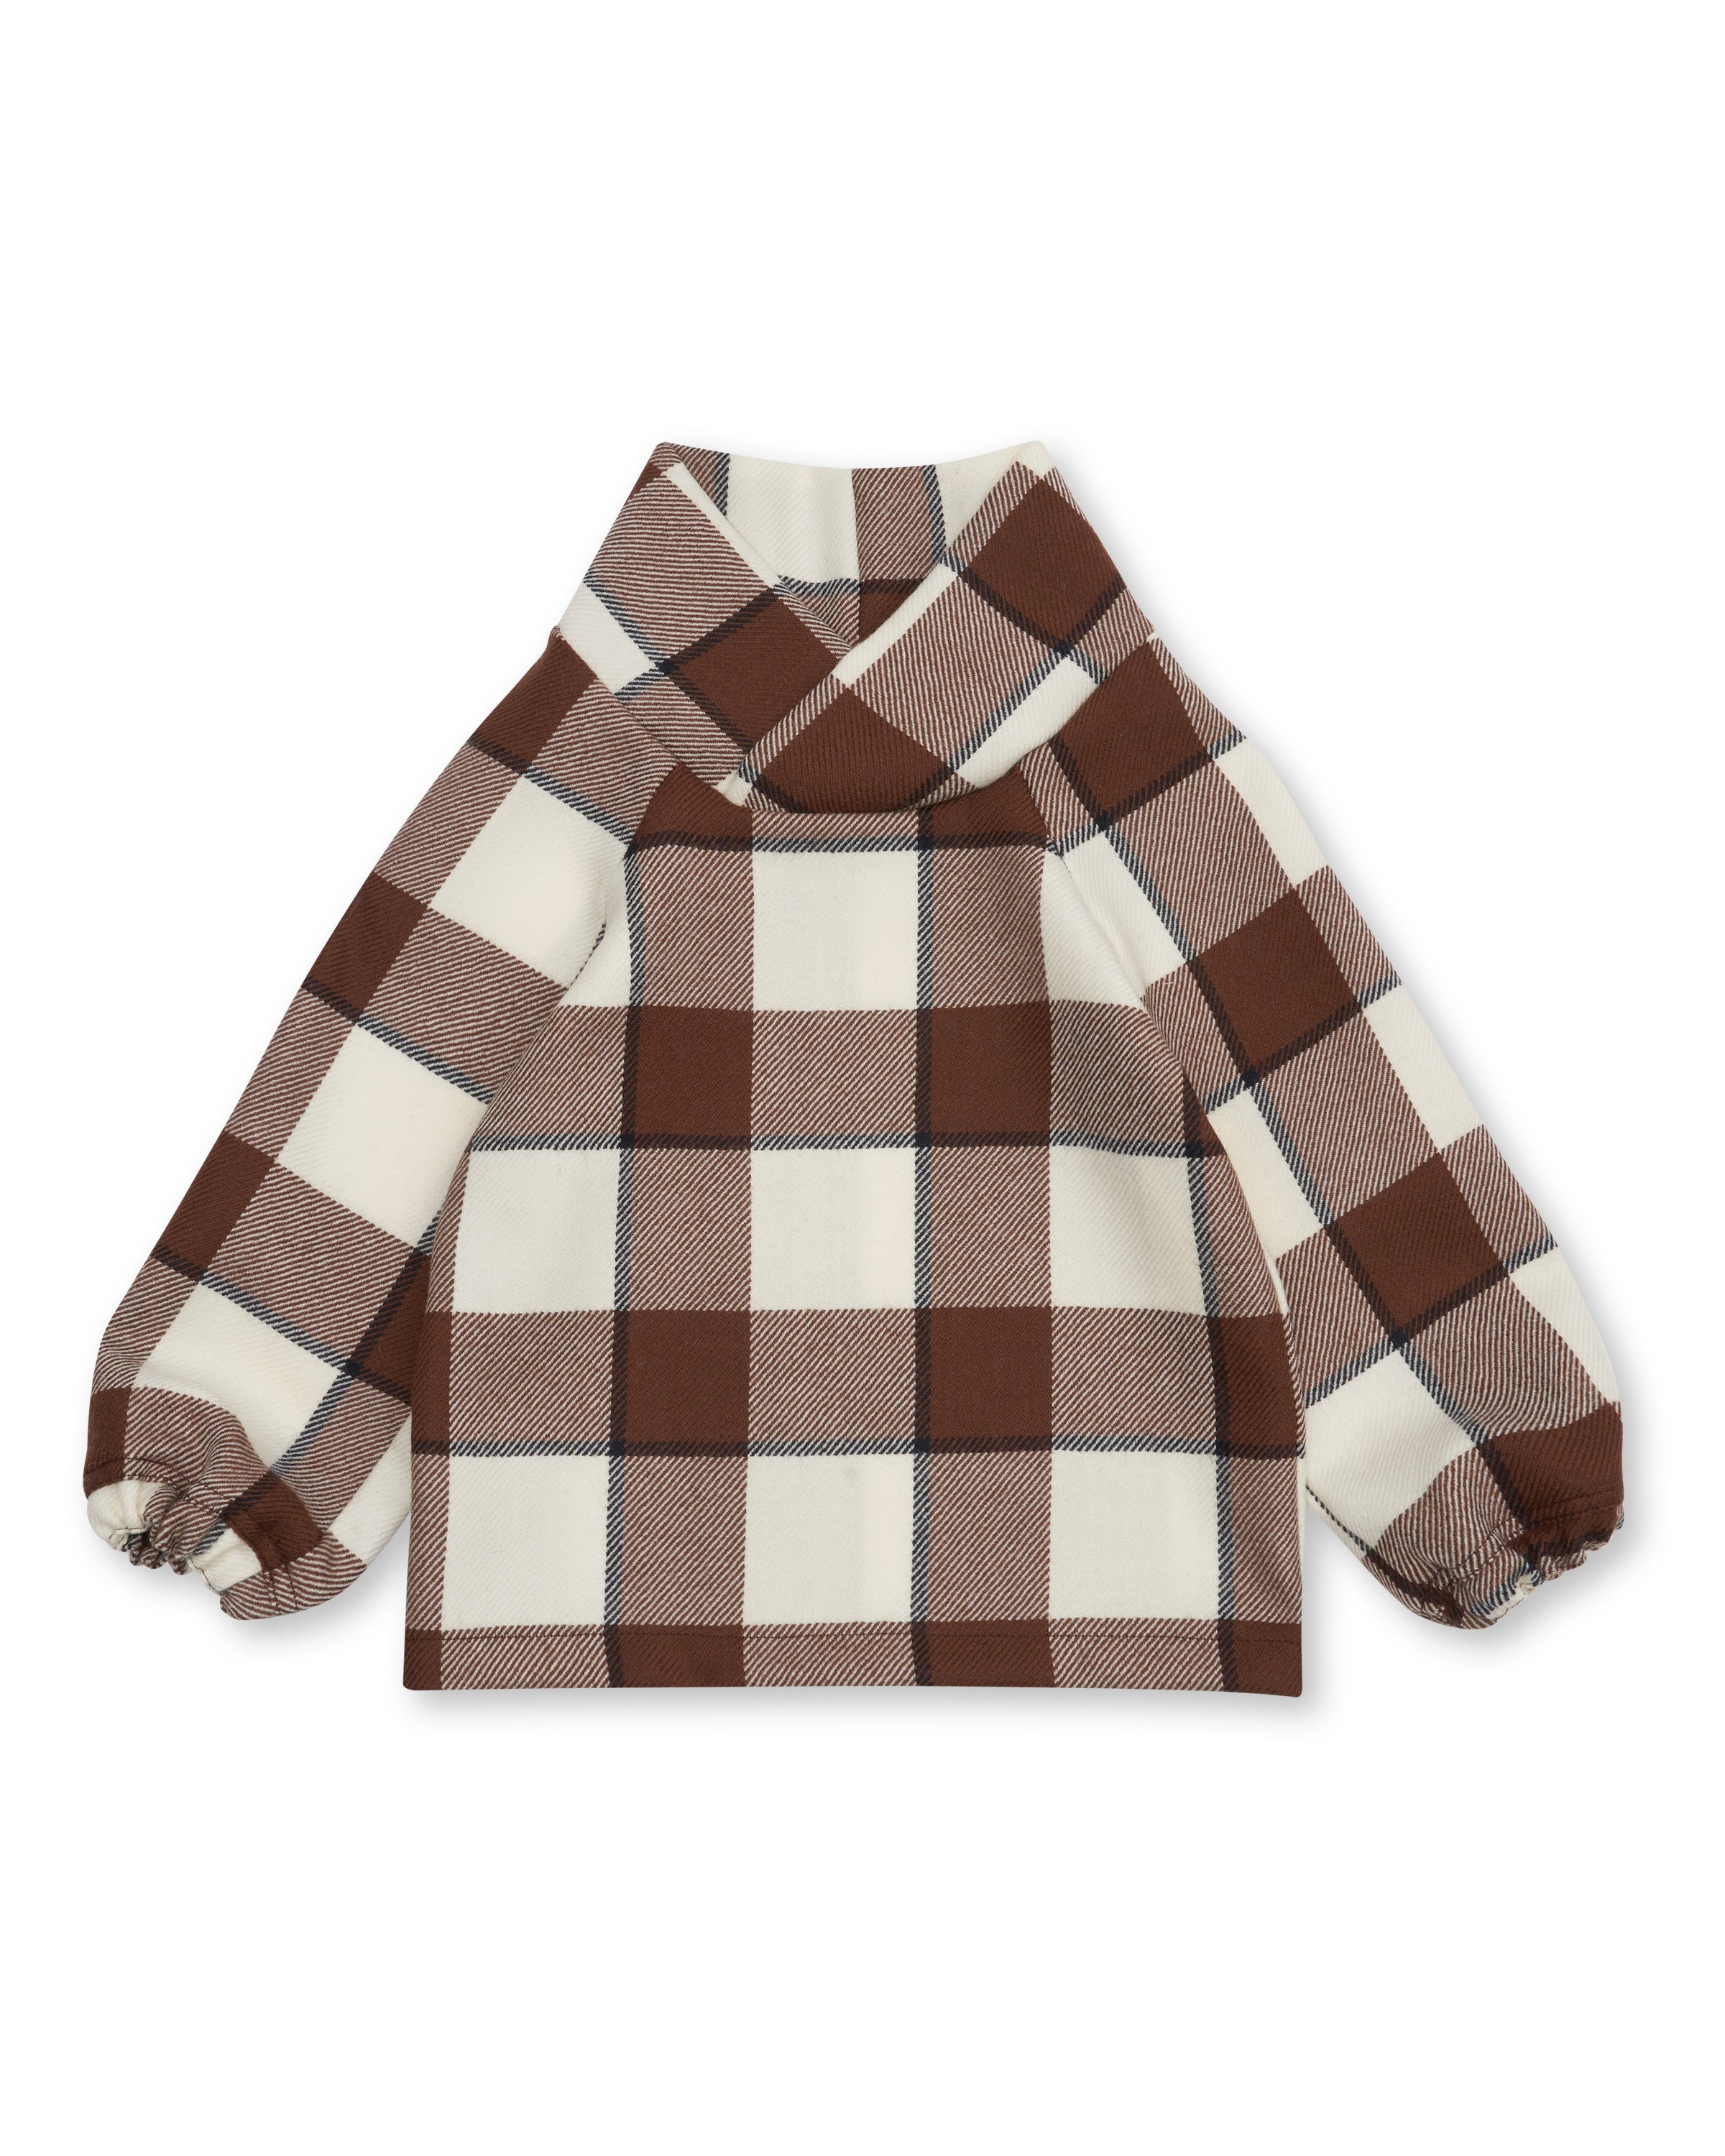 Boys' Designer Jumper, 100% Wool, Brown Check, ages 1 to 6.Boys' Designer Jumper, 100% Wool, Brown Check, ages 1 to 6.